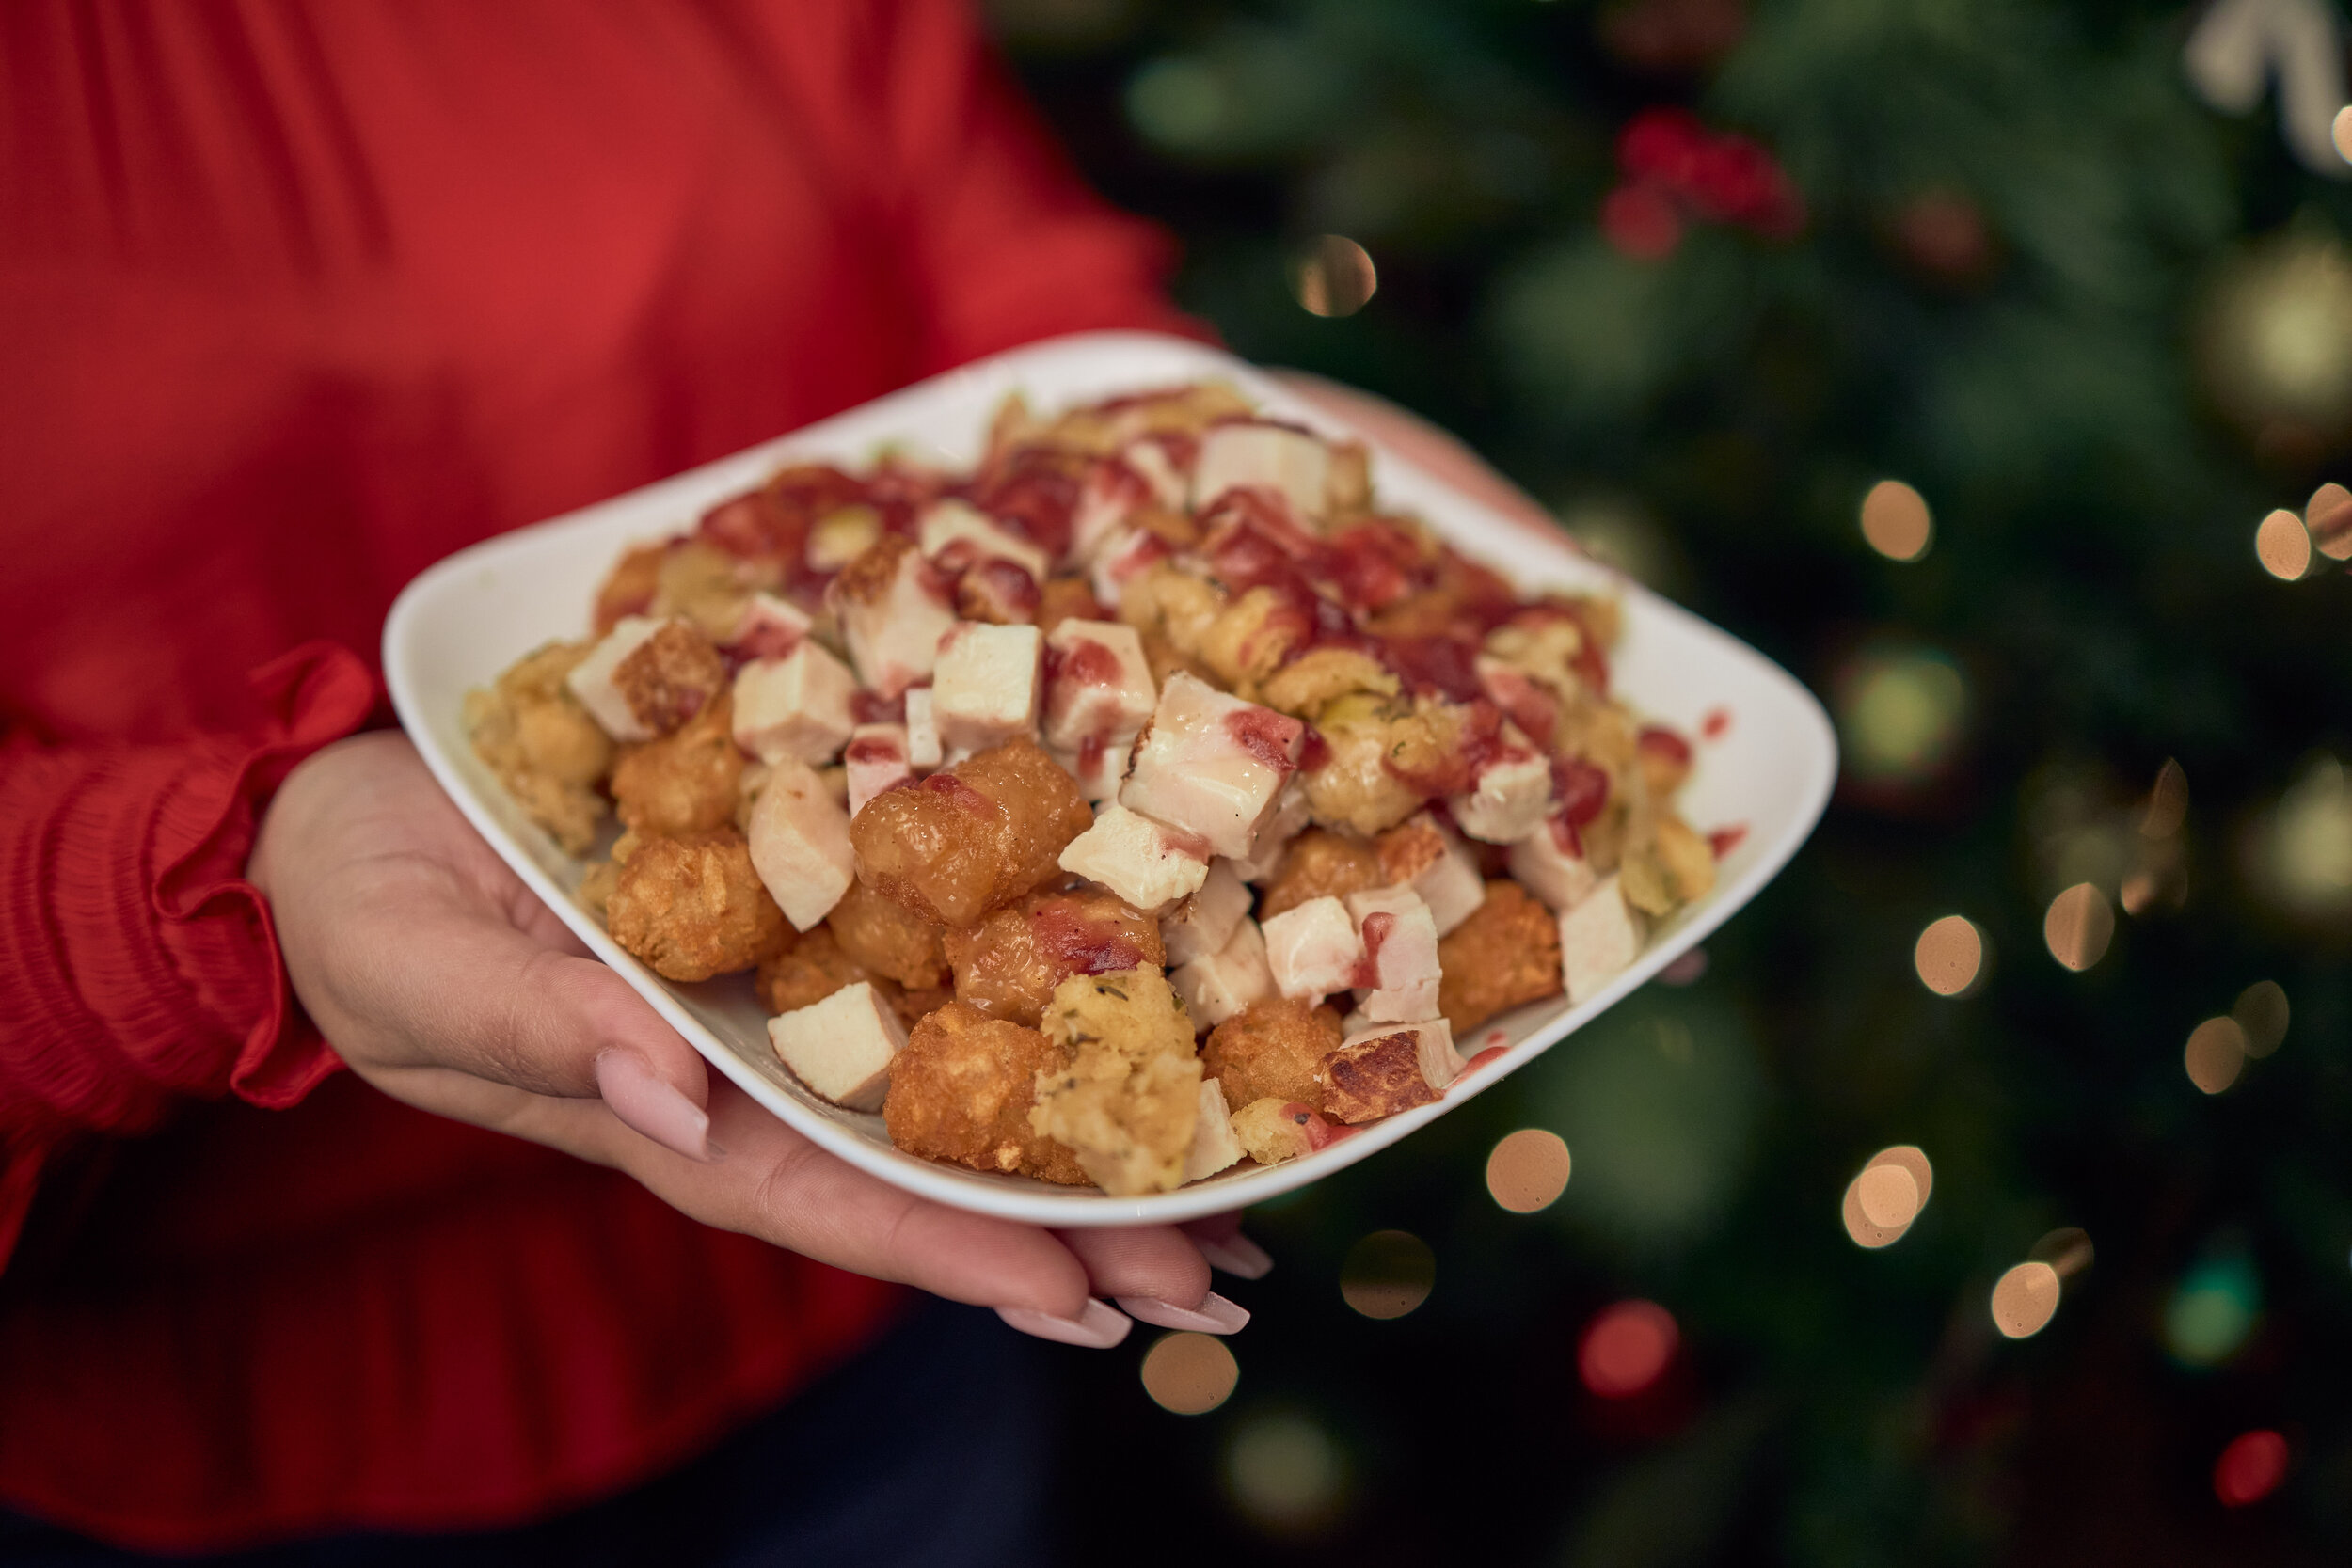     Sign in Sign up  Turkey Dinner Tater Tots, TurkeyStuffing, Gravy and Cranberry